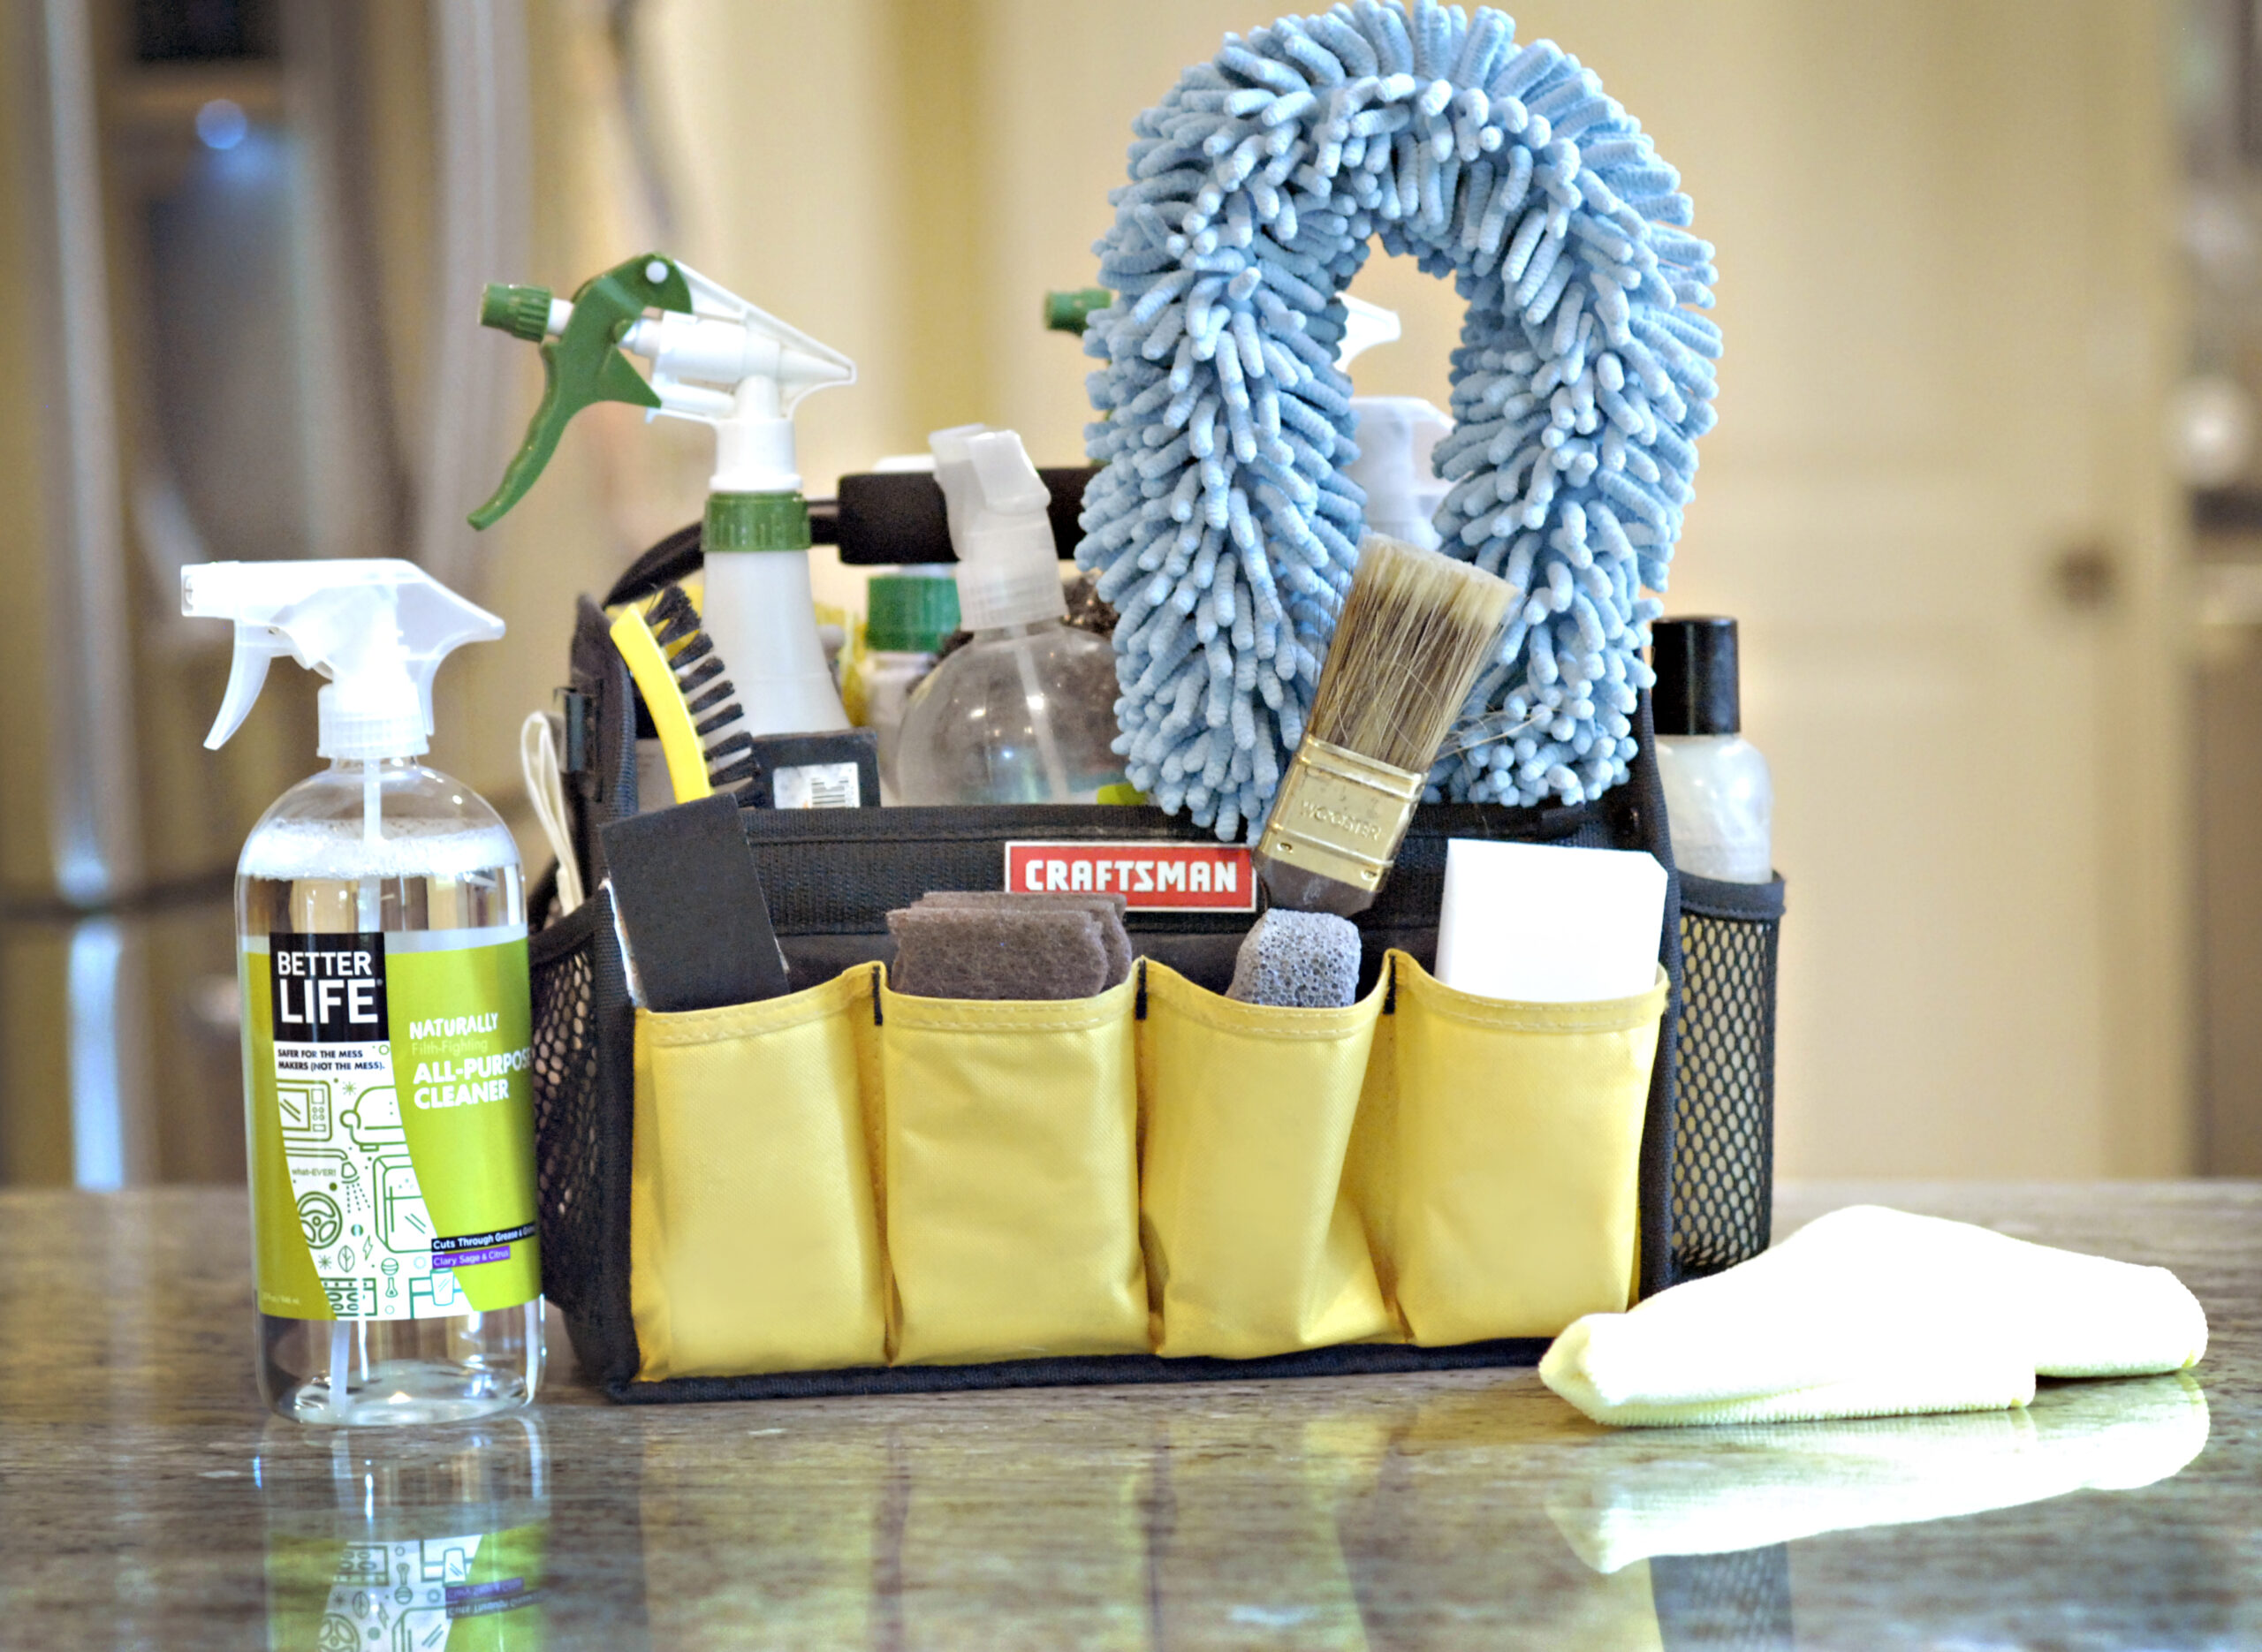 Naturalcare Clraning Service green cleaning products that may be more reliable than mopping with cinnamon are displayed on a kitchen counter.